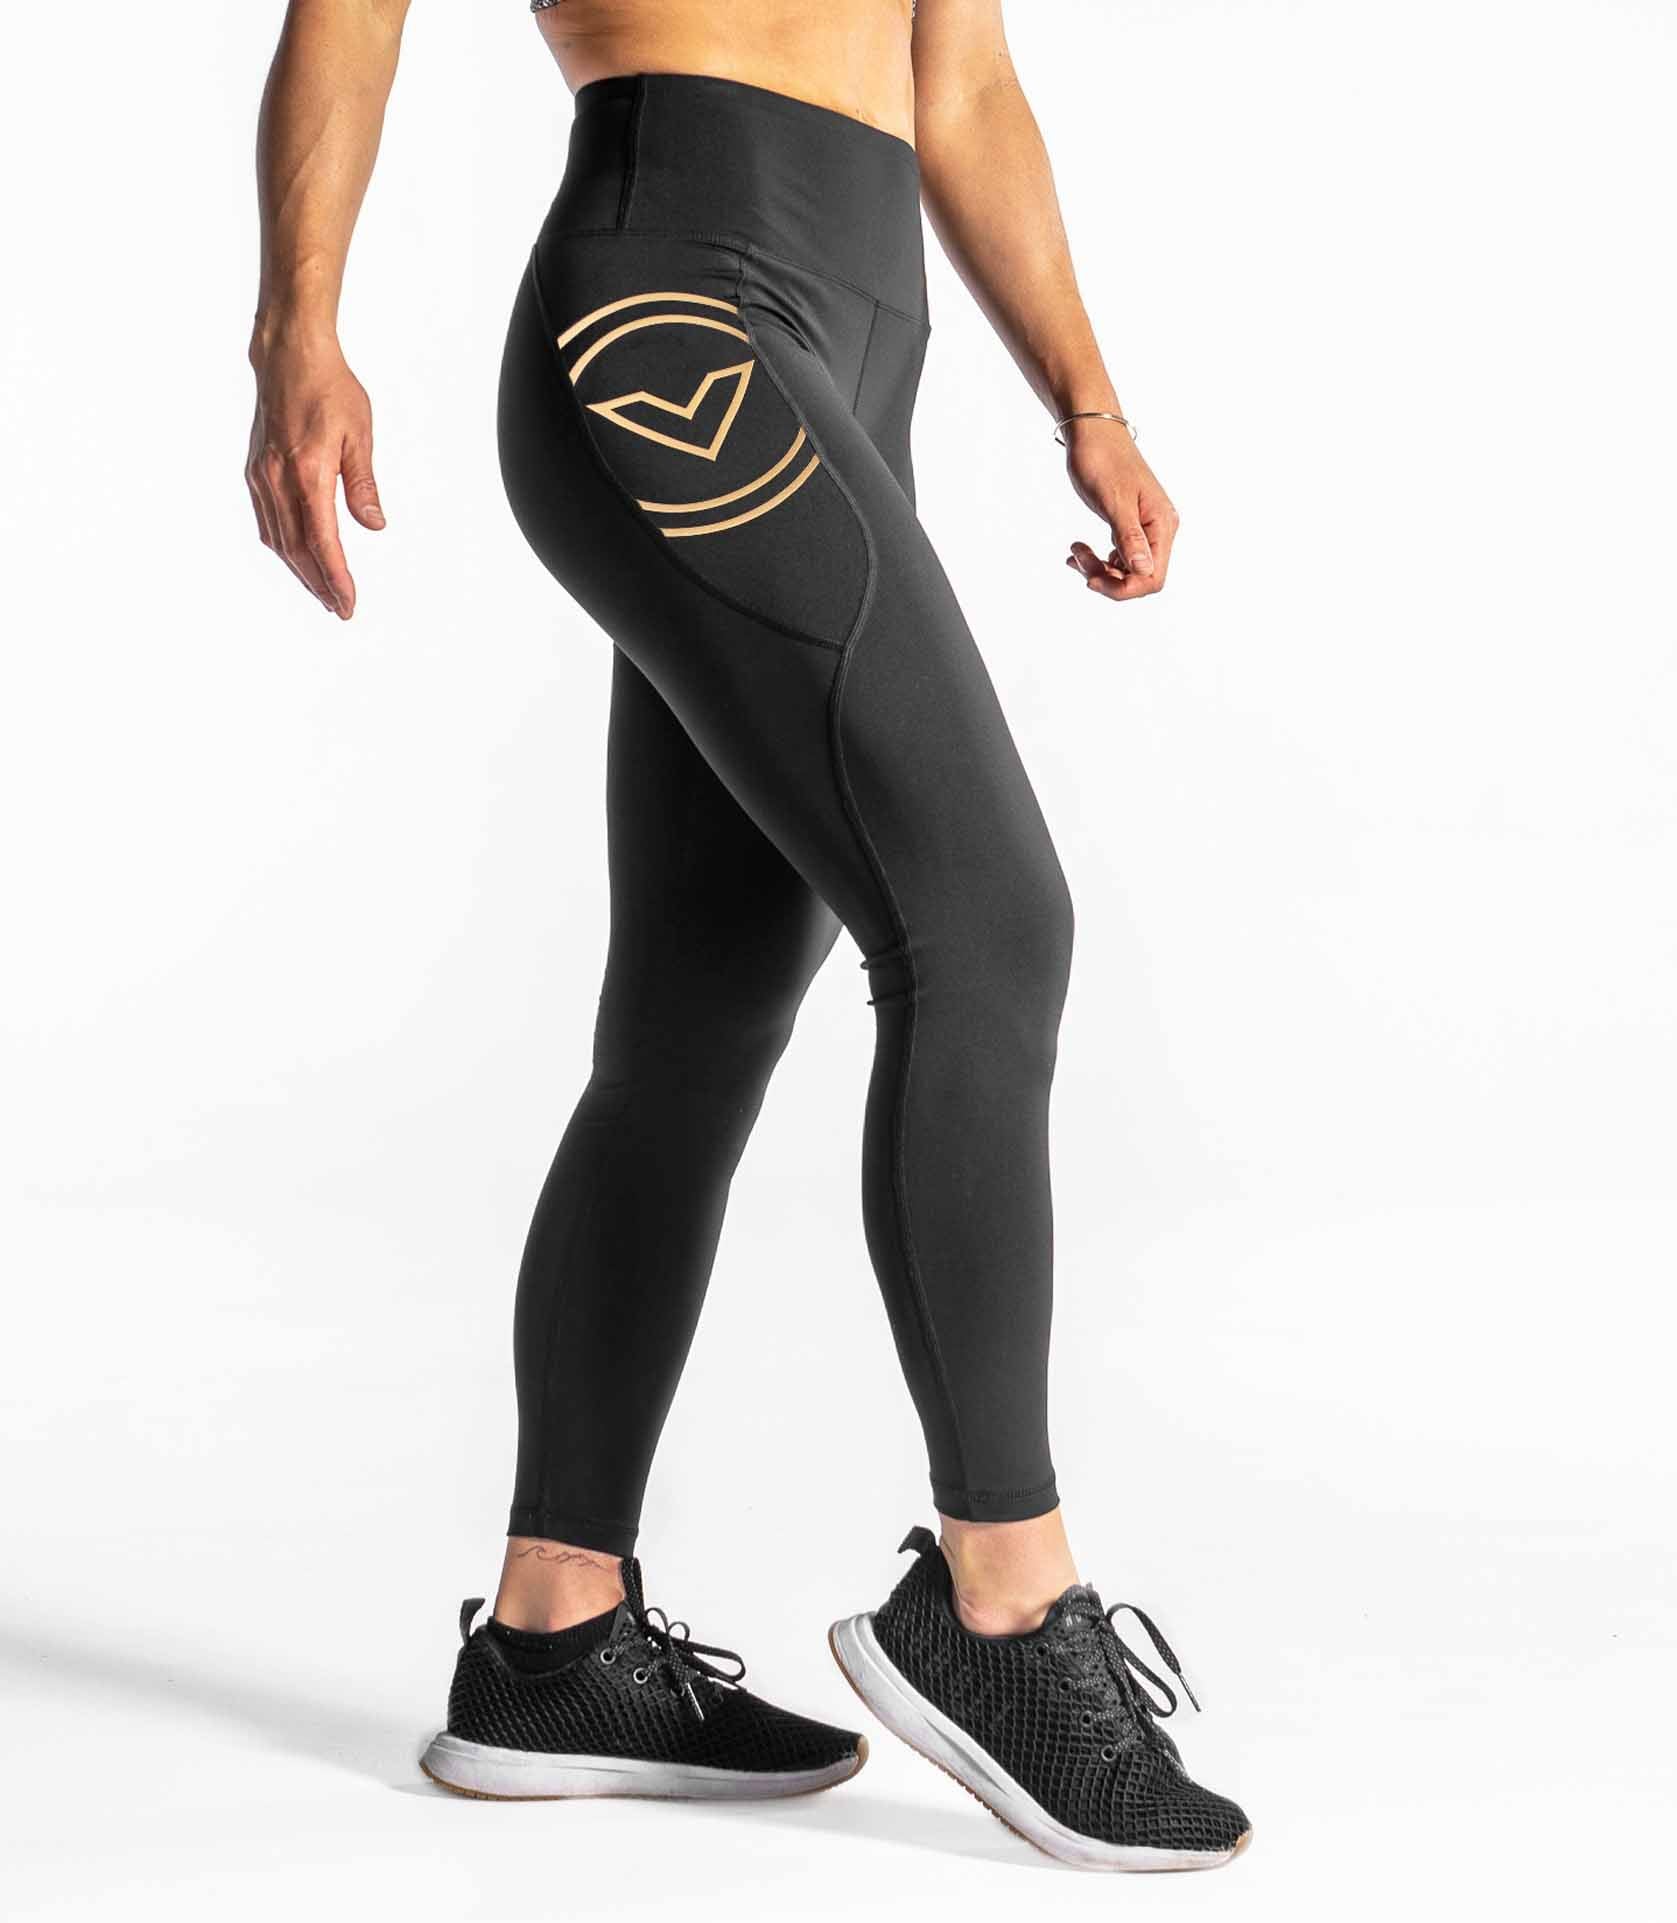 Recover stronger and faster with our Bioceramic Au9 Compression Tech Pant.  Head on over to the technology page at virusintl.com to learn more about  our …